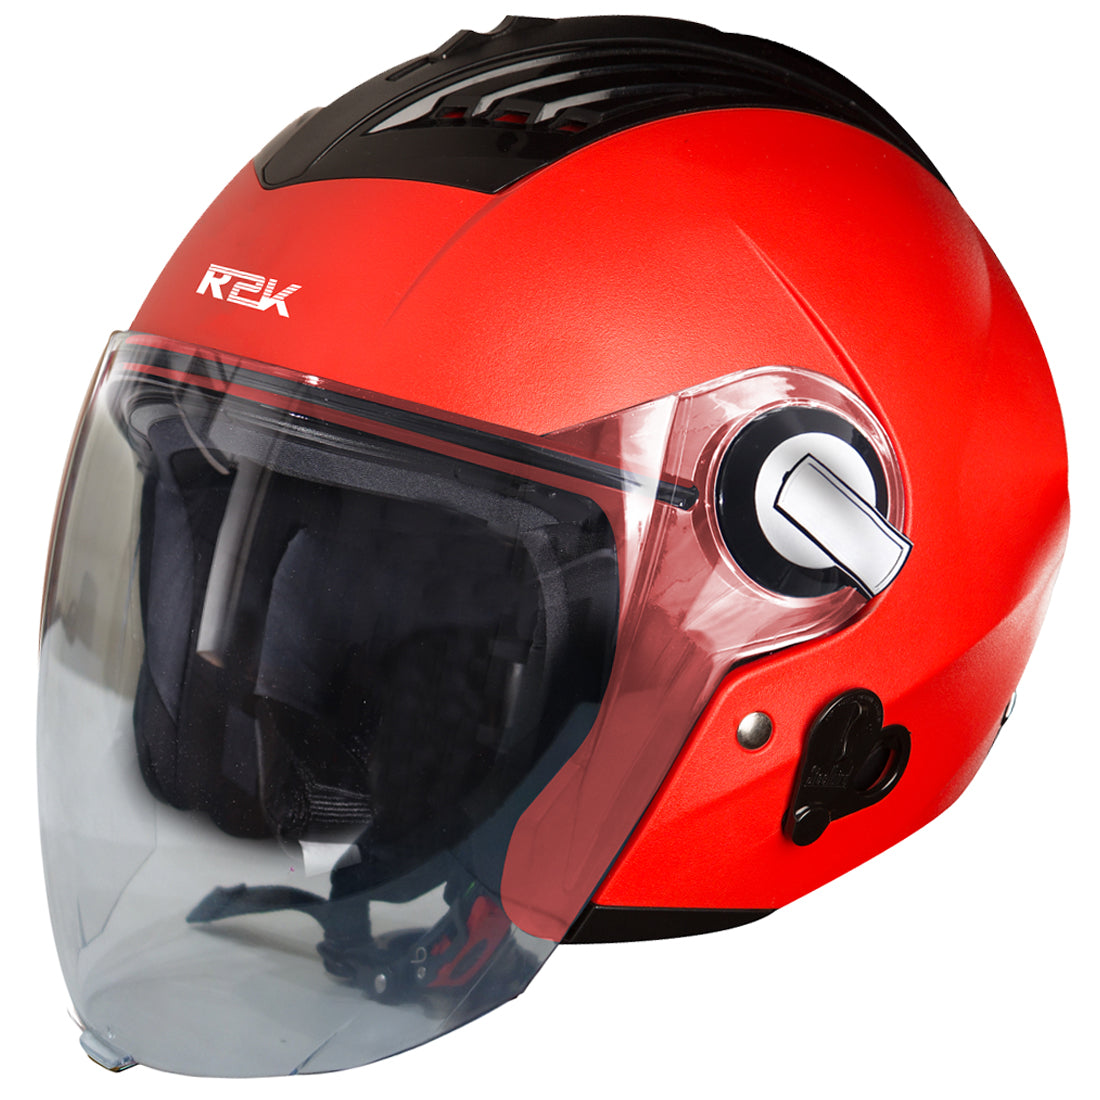 Steelbird SBA-3 R2K Classic ISI Certified Open Face Helmet (Red with Clear Visor)